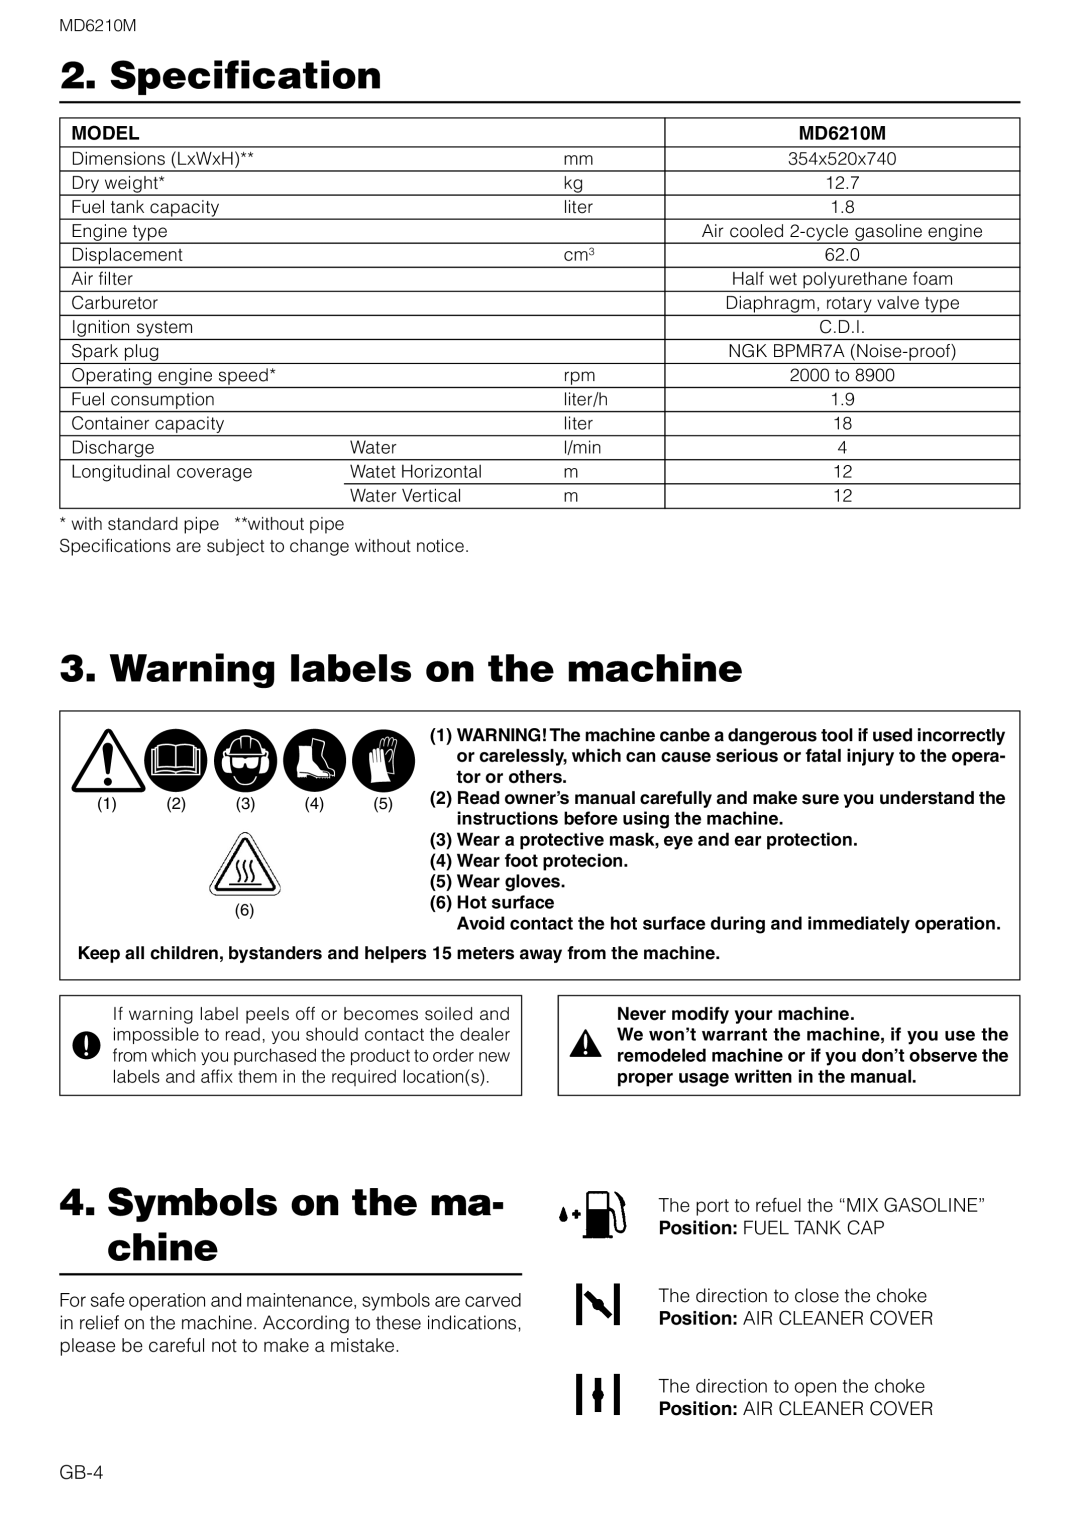 Zenoah MD6210M owner manual Specification, Warning labels on the machine, Symbols on the ma- chine, Model 